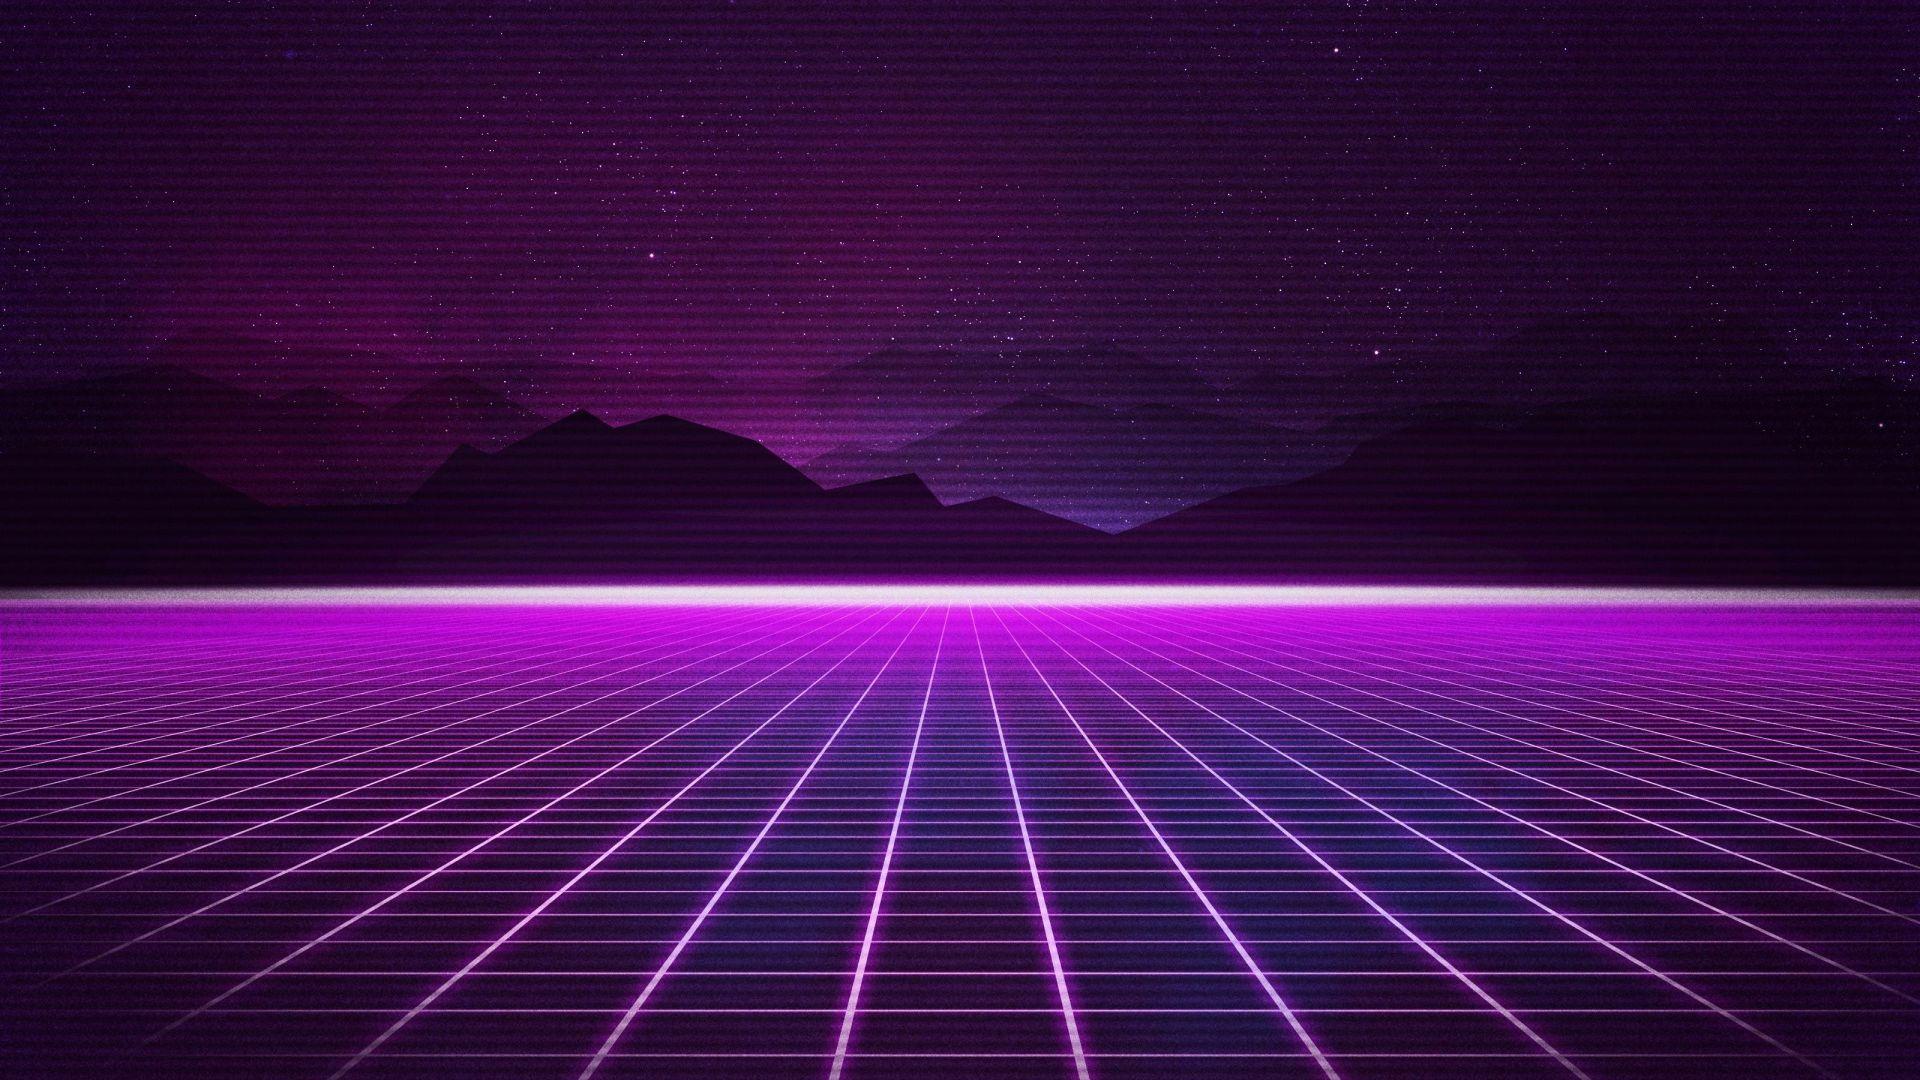 Wallpaper Neon, Synthwave, Retrowave, Grid, Mountains, Purple, HD, Creative Graphics,. Wallpaper for iPhon. Vaporwave wallpaper, Wallpaper pc, Retro waves